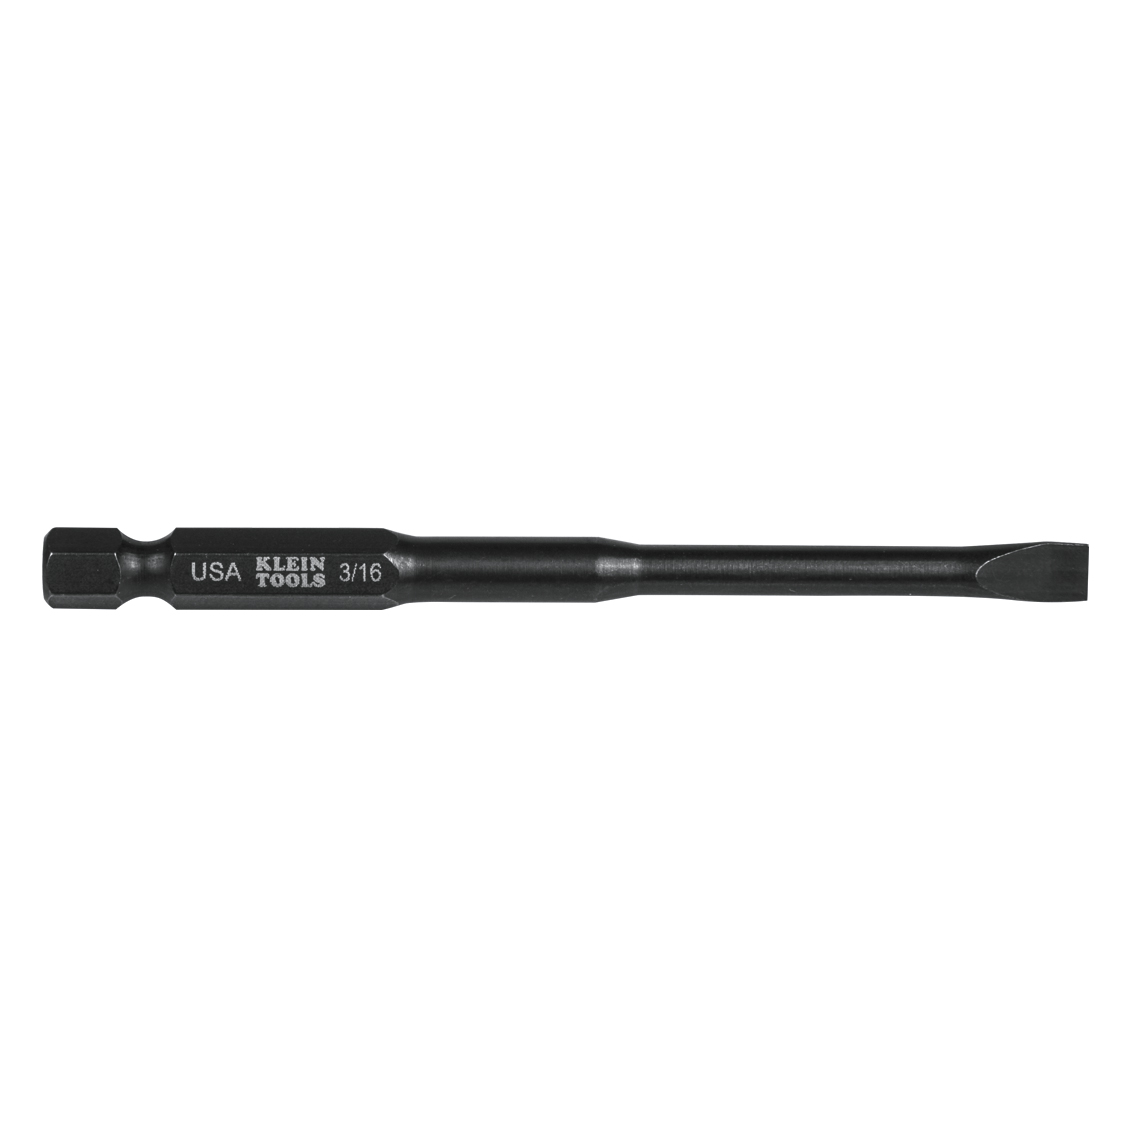 3/16-Inch Slotted Drivers, 3-1/2-Inch Bit, 5-Pack, Designed and constructed to withstand impact drills